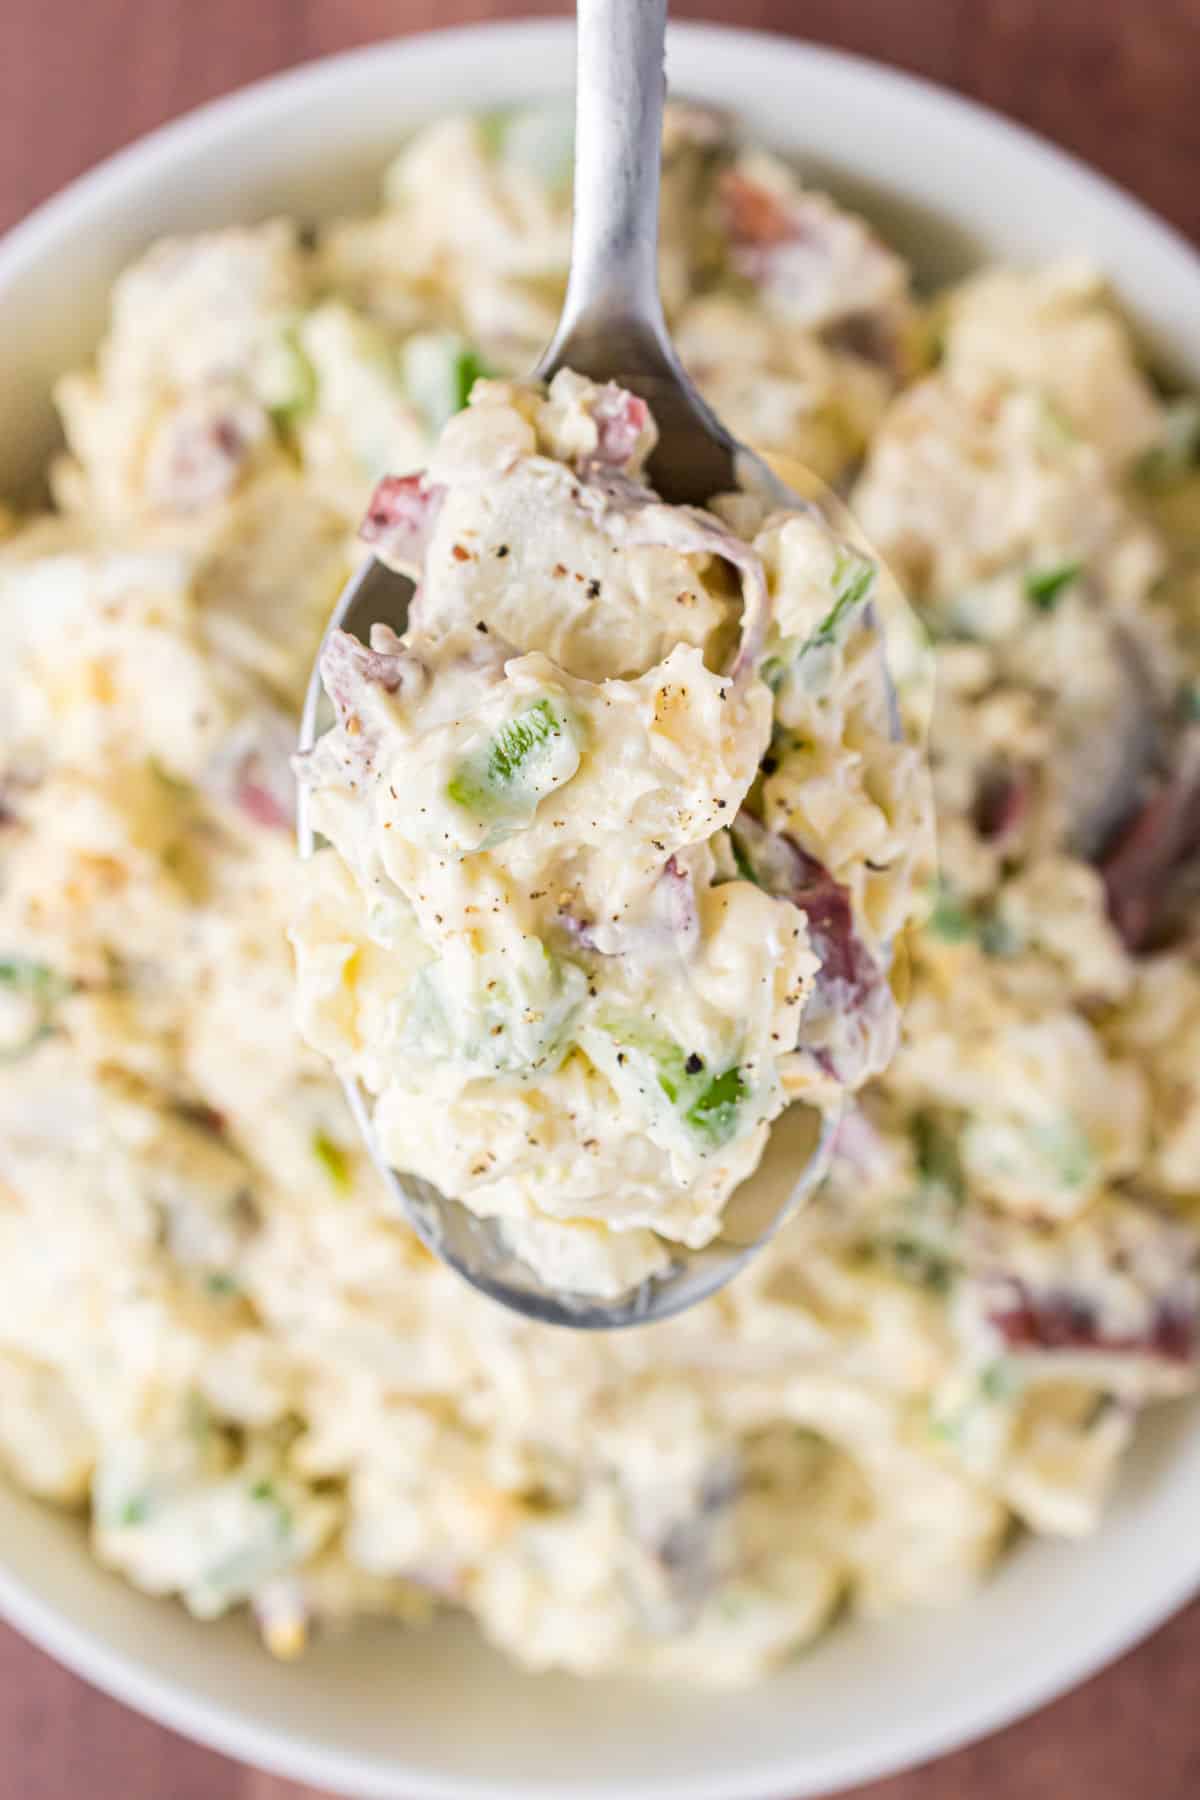 Potato salad recipe with chunks of peppers, onions, eggs, and creamy mayonnaise.